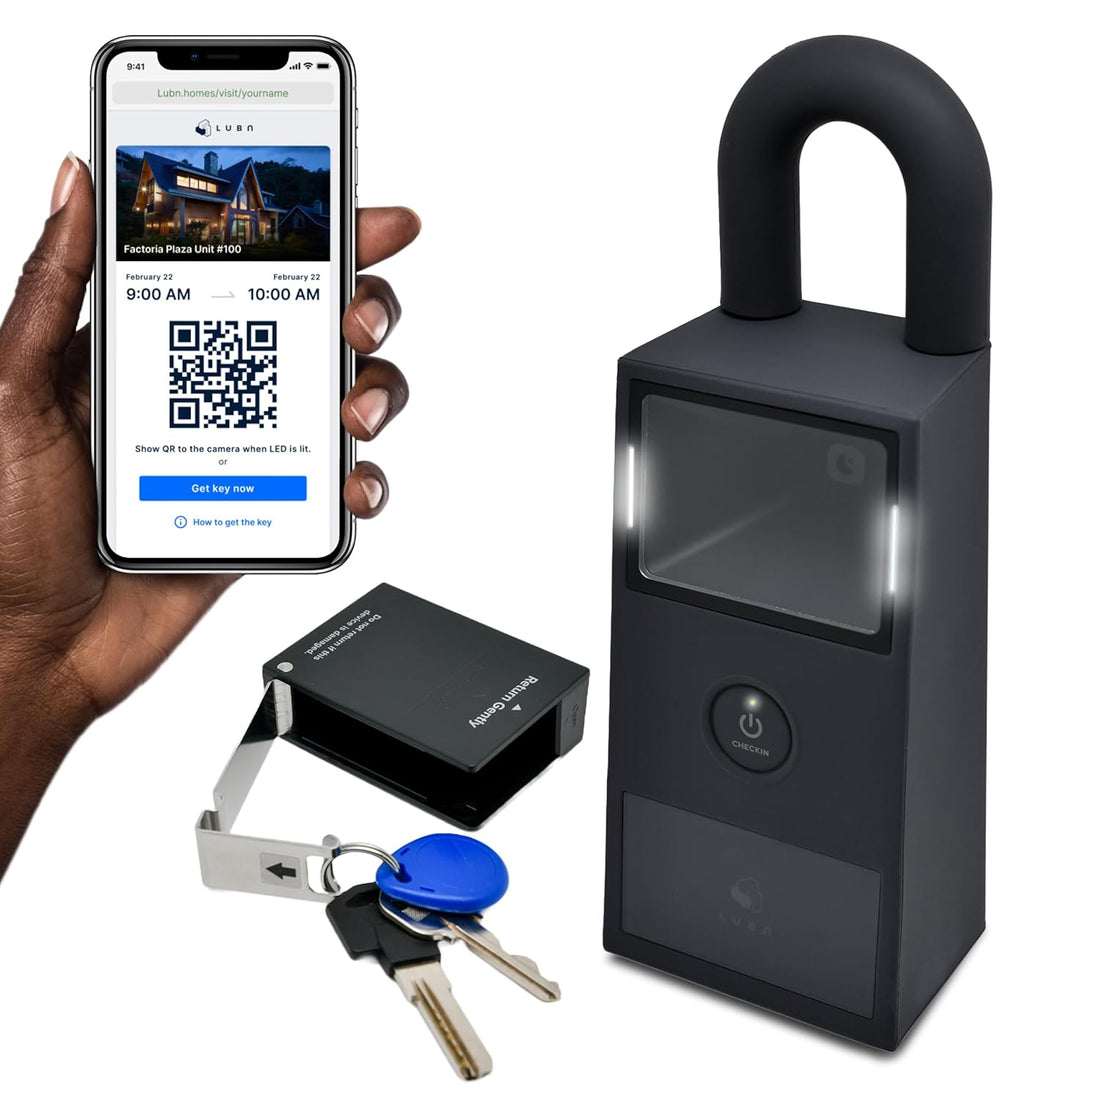 Lubn LTE Smart Camera Key Lock Box, Remote APP Key Box with QR Code Secure Access, Durable Outdoor Weatherproof Portable Digital Key Safe, Instant Visitor Check-in Photo Notice(Free 3 Month LTE Data)